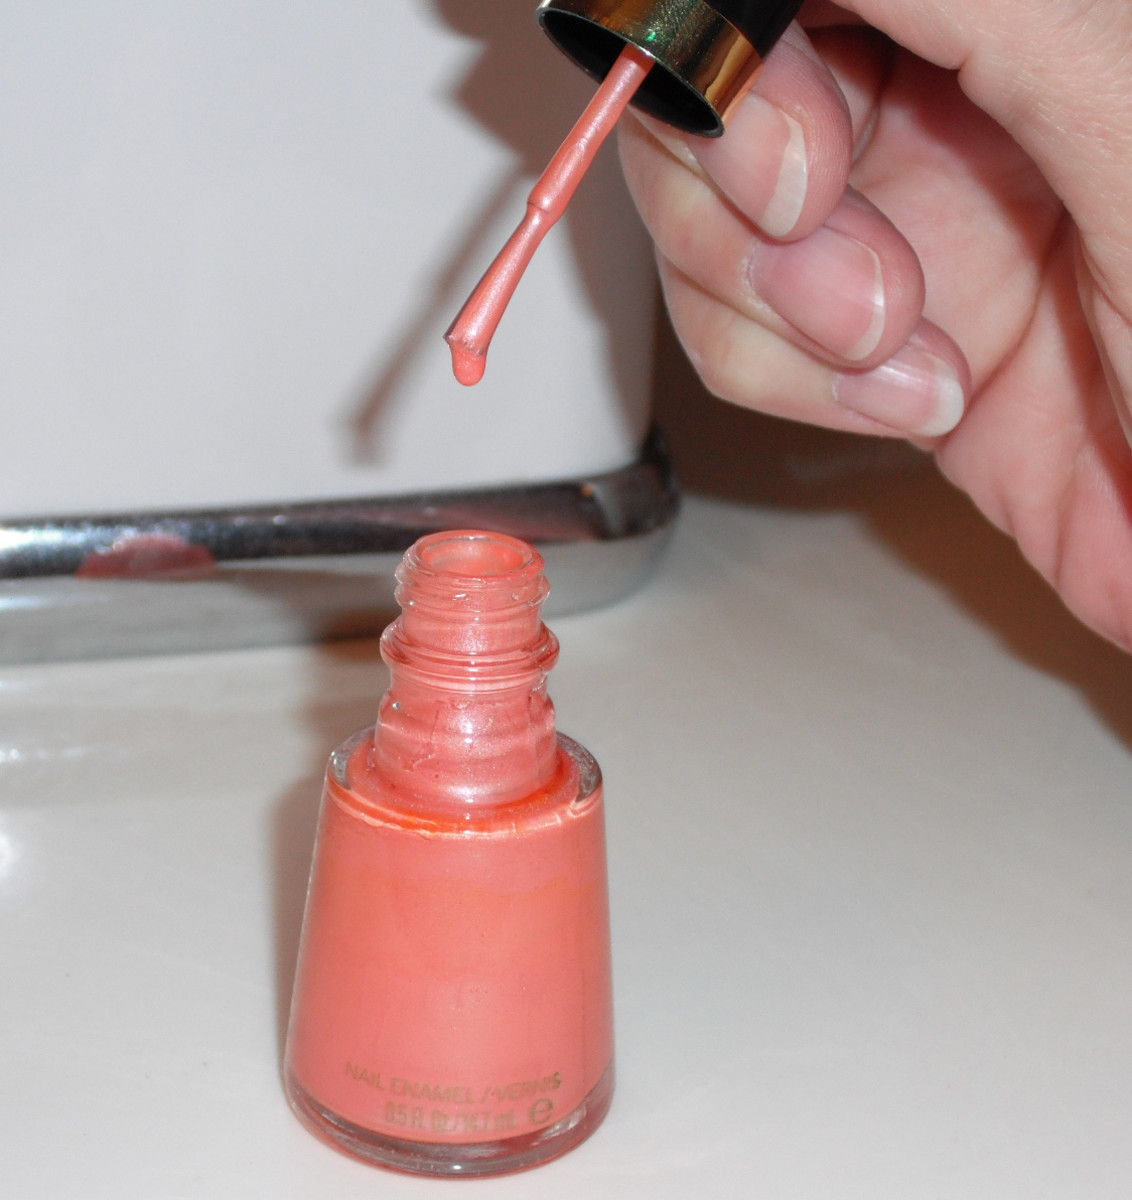 What causes some nail polishes to get thick when you open them? - Quora